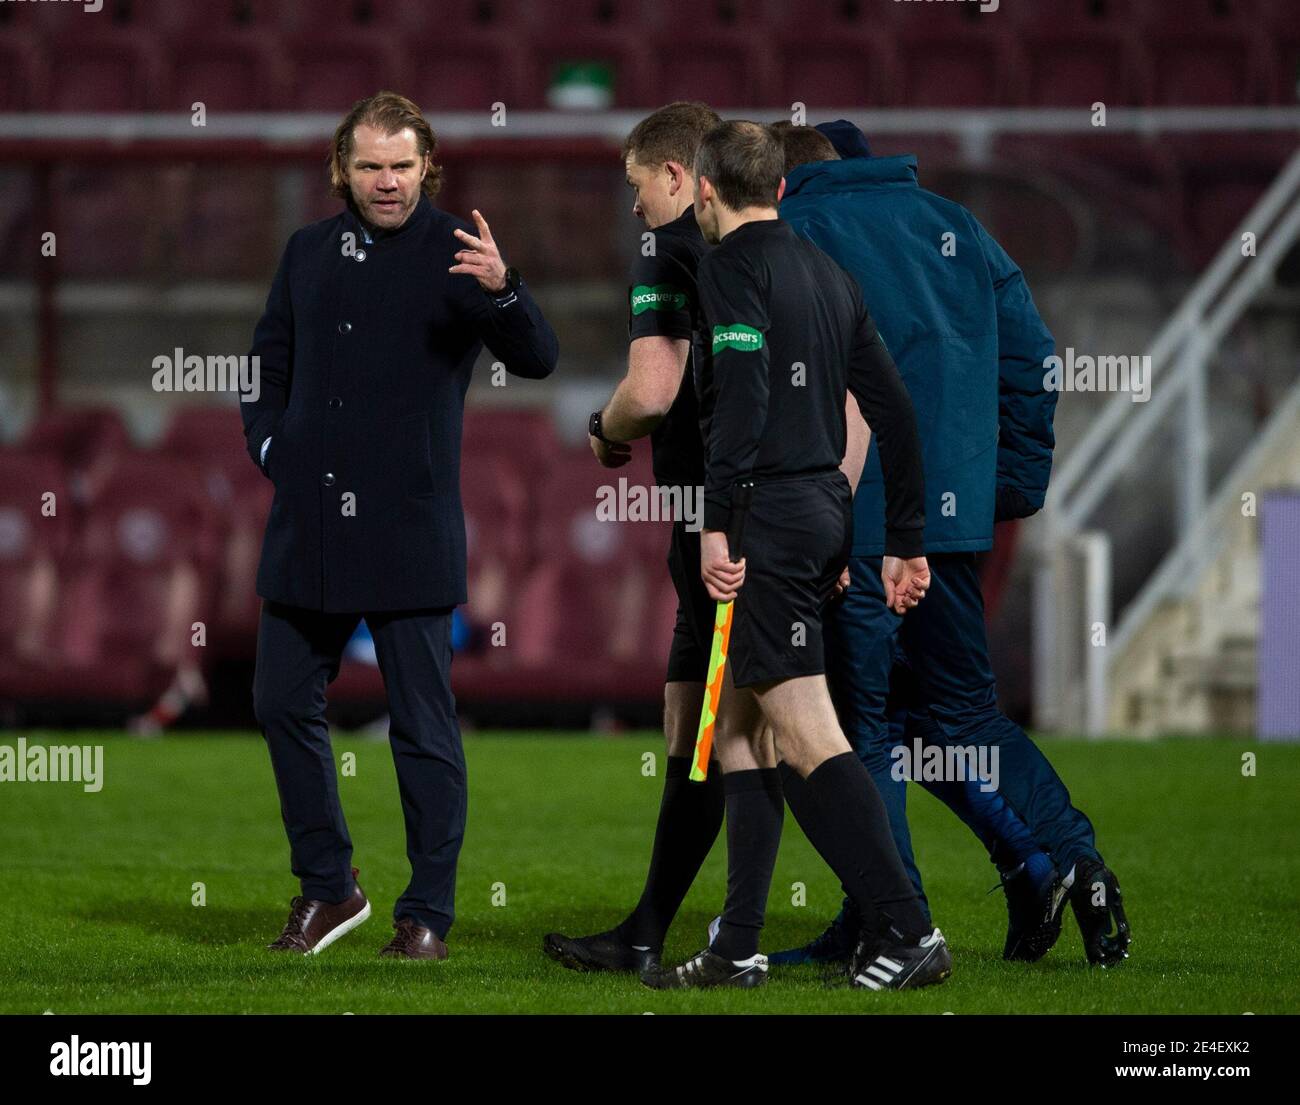 Scottish Championship - Heart of Midlothian v Raith rovers. Tynecastle Park, Edinburgh, Midlothian, UK. 23rd Jan, 2021. Hearts play host to Raith Rovers in the Scottish Championship at Tynecastle Park, Edinburgh. Pic shows: Hearts' manager, Robbie Neilson, accosts the match officials after the final whistle. Credit: Ian Jacobs/Alamy Live News Stock Photo